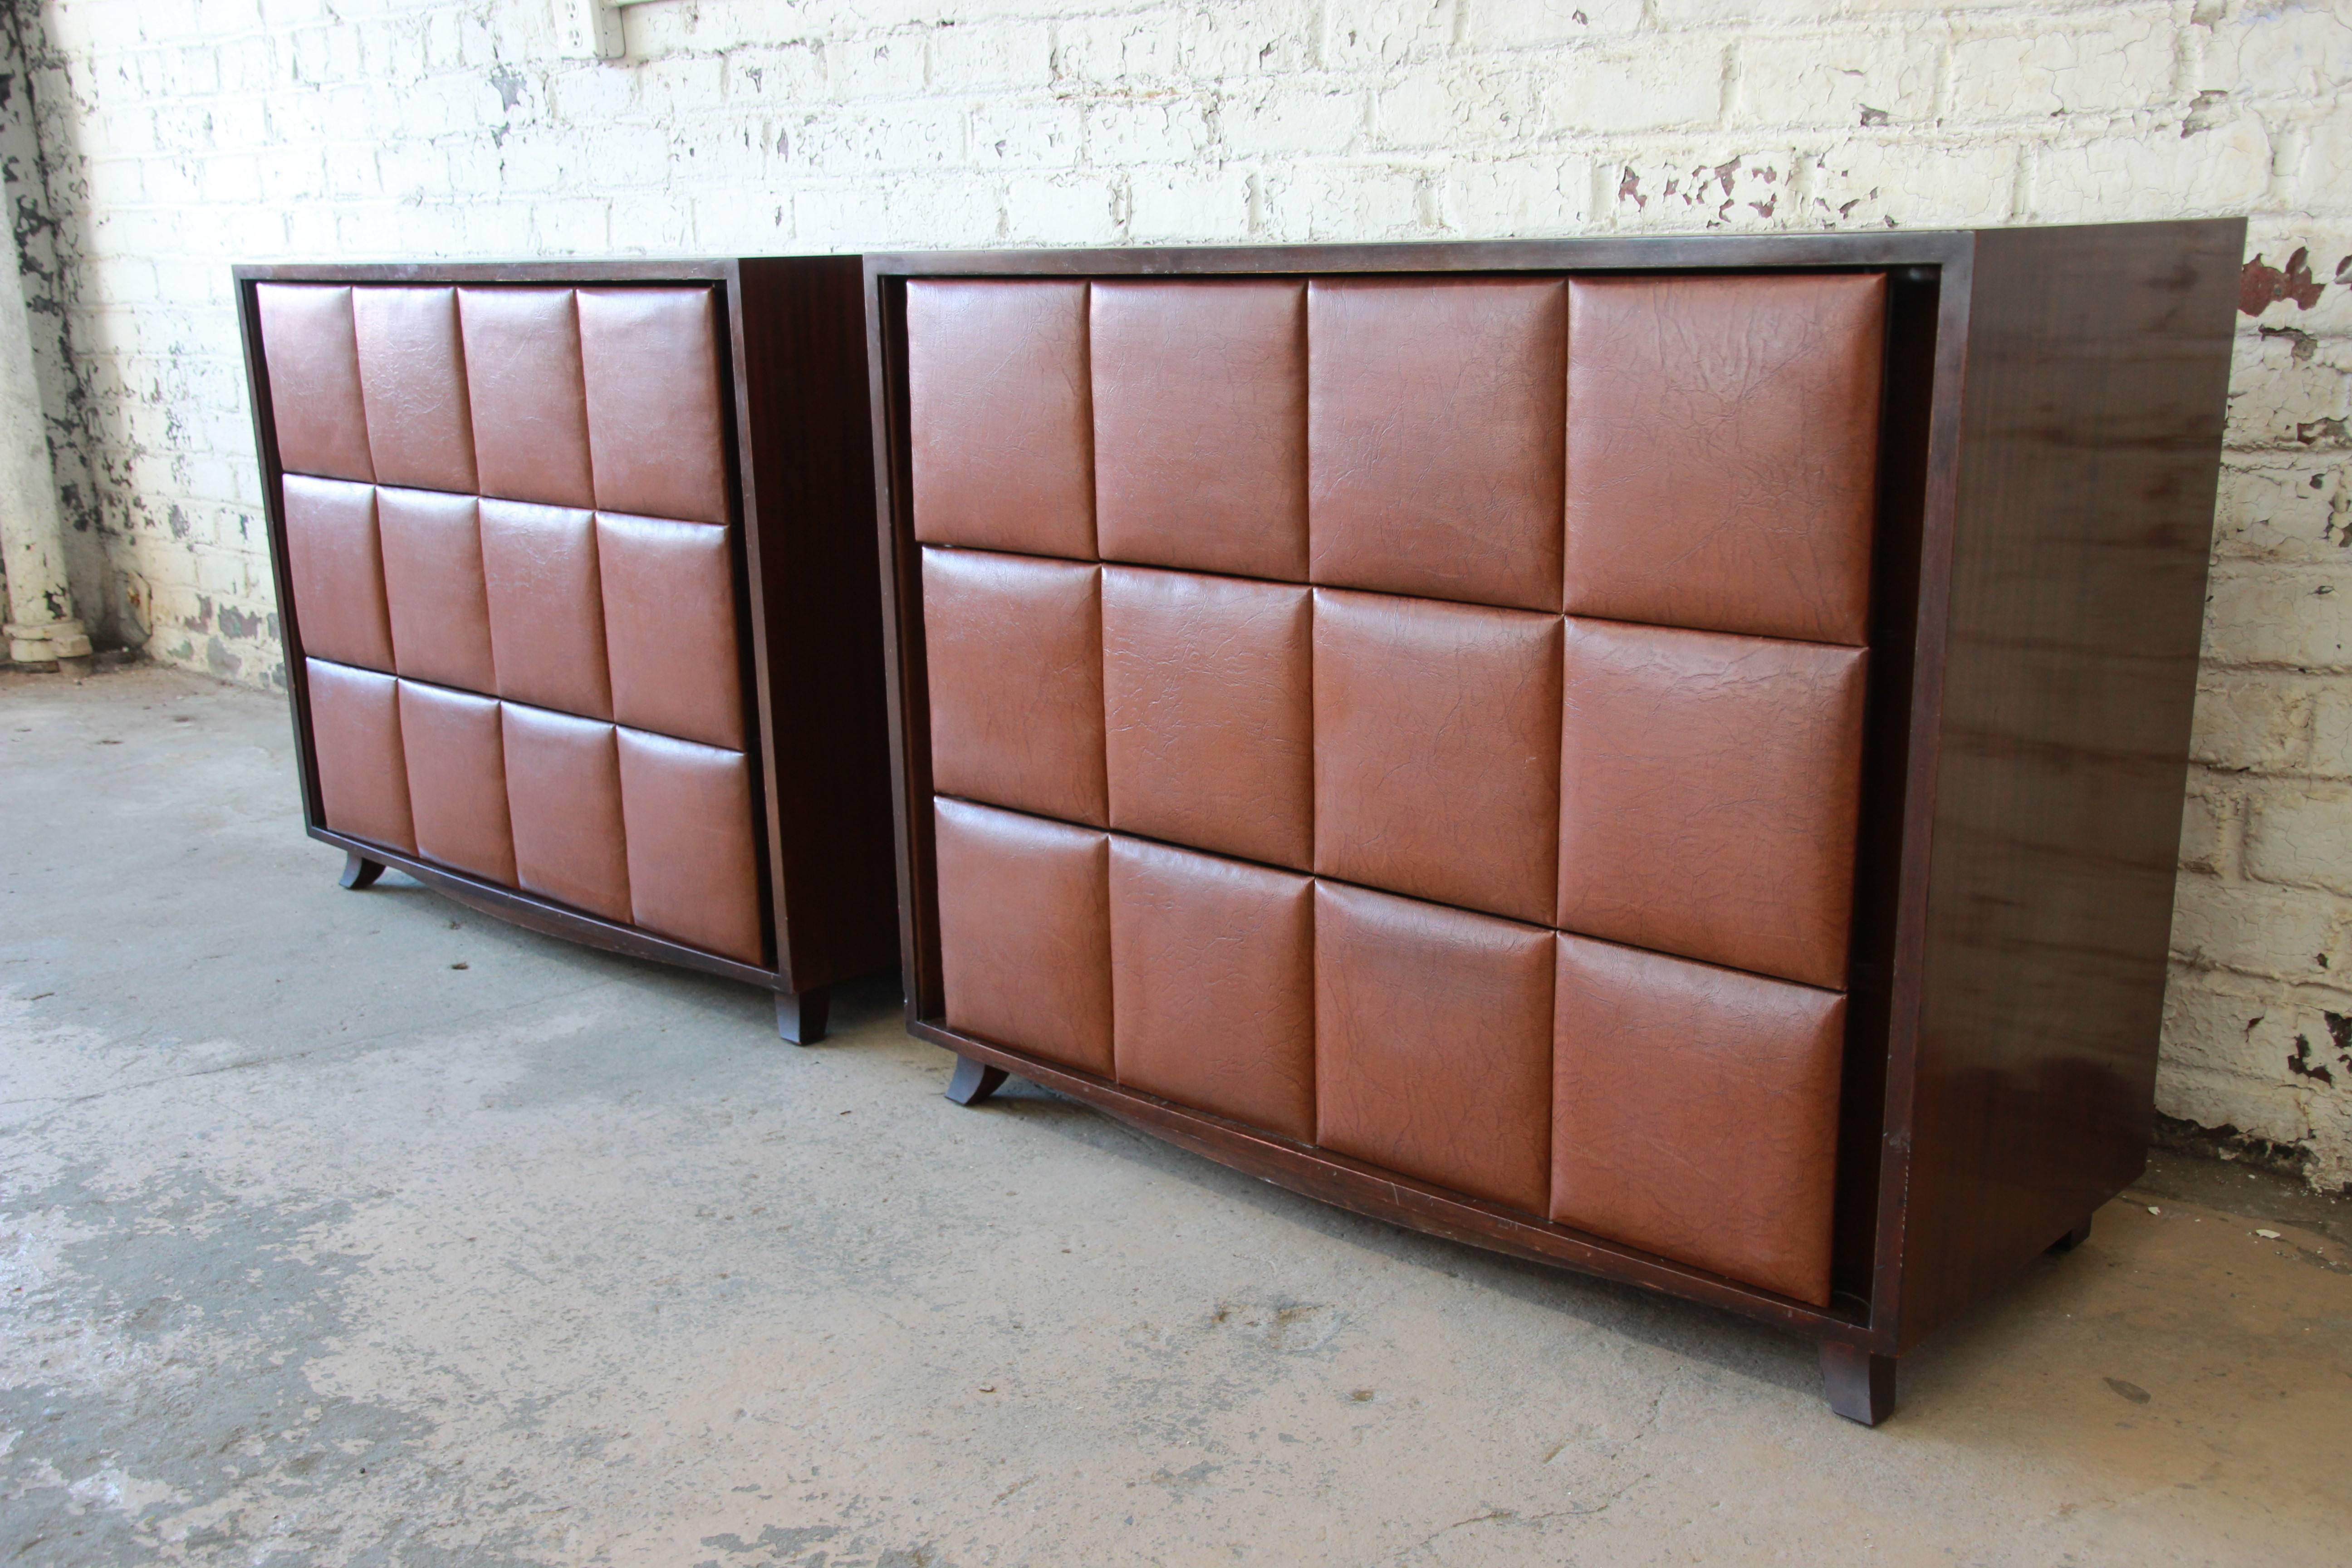 An outstanding pair of three-drawer chests designed in the 1930s by Gilbert Rohde for Herman Miller. The chests feature gorgeous mahogany cabinets with original padded Naugahyde drawer fronts. They offer ample room for storage with three deep